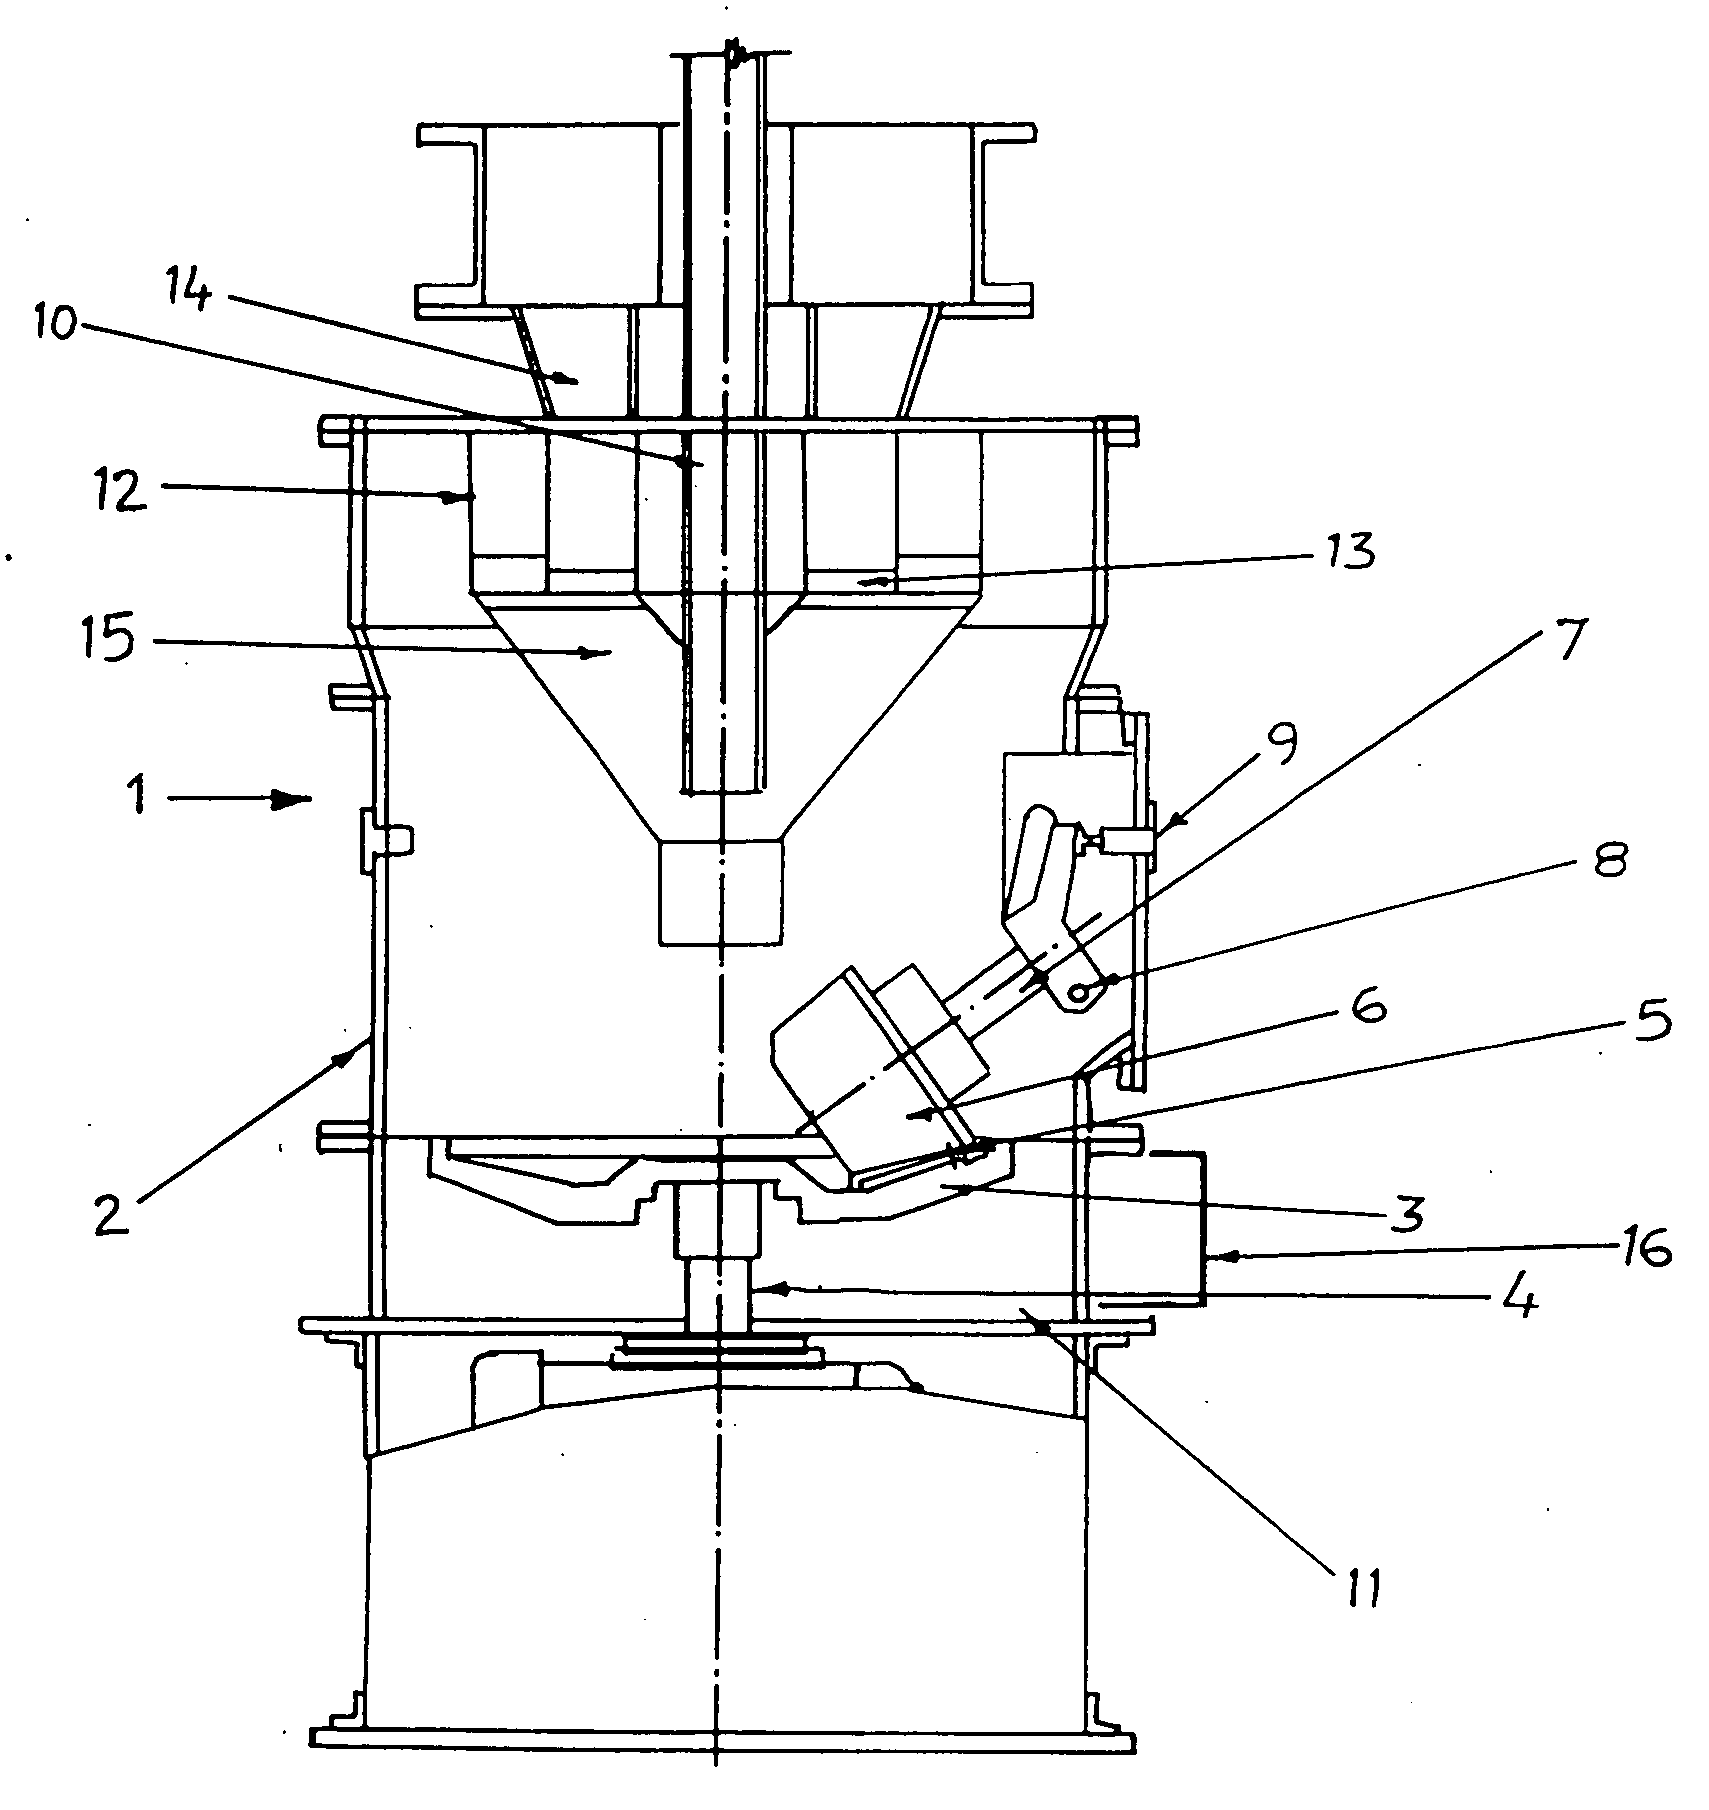 Bowl mill for a coal pulverizer with an air mill for primary entry of air